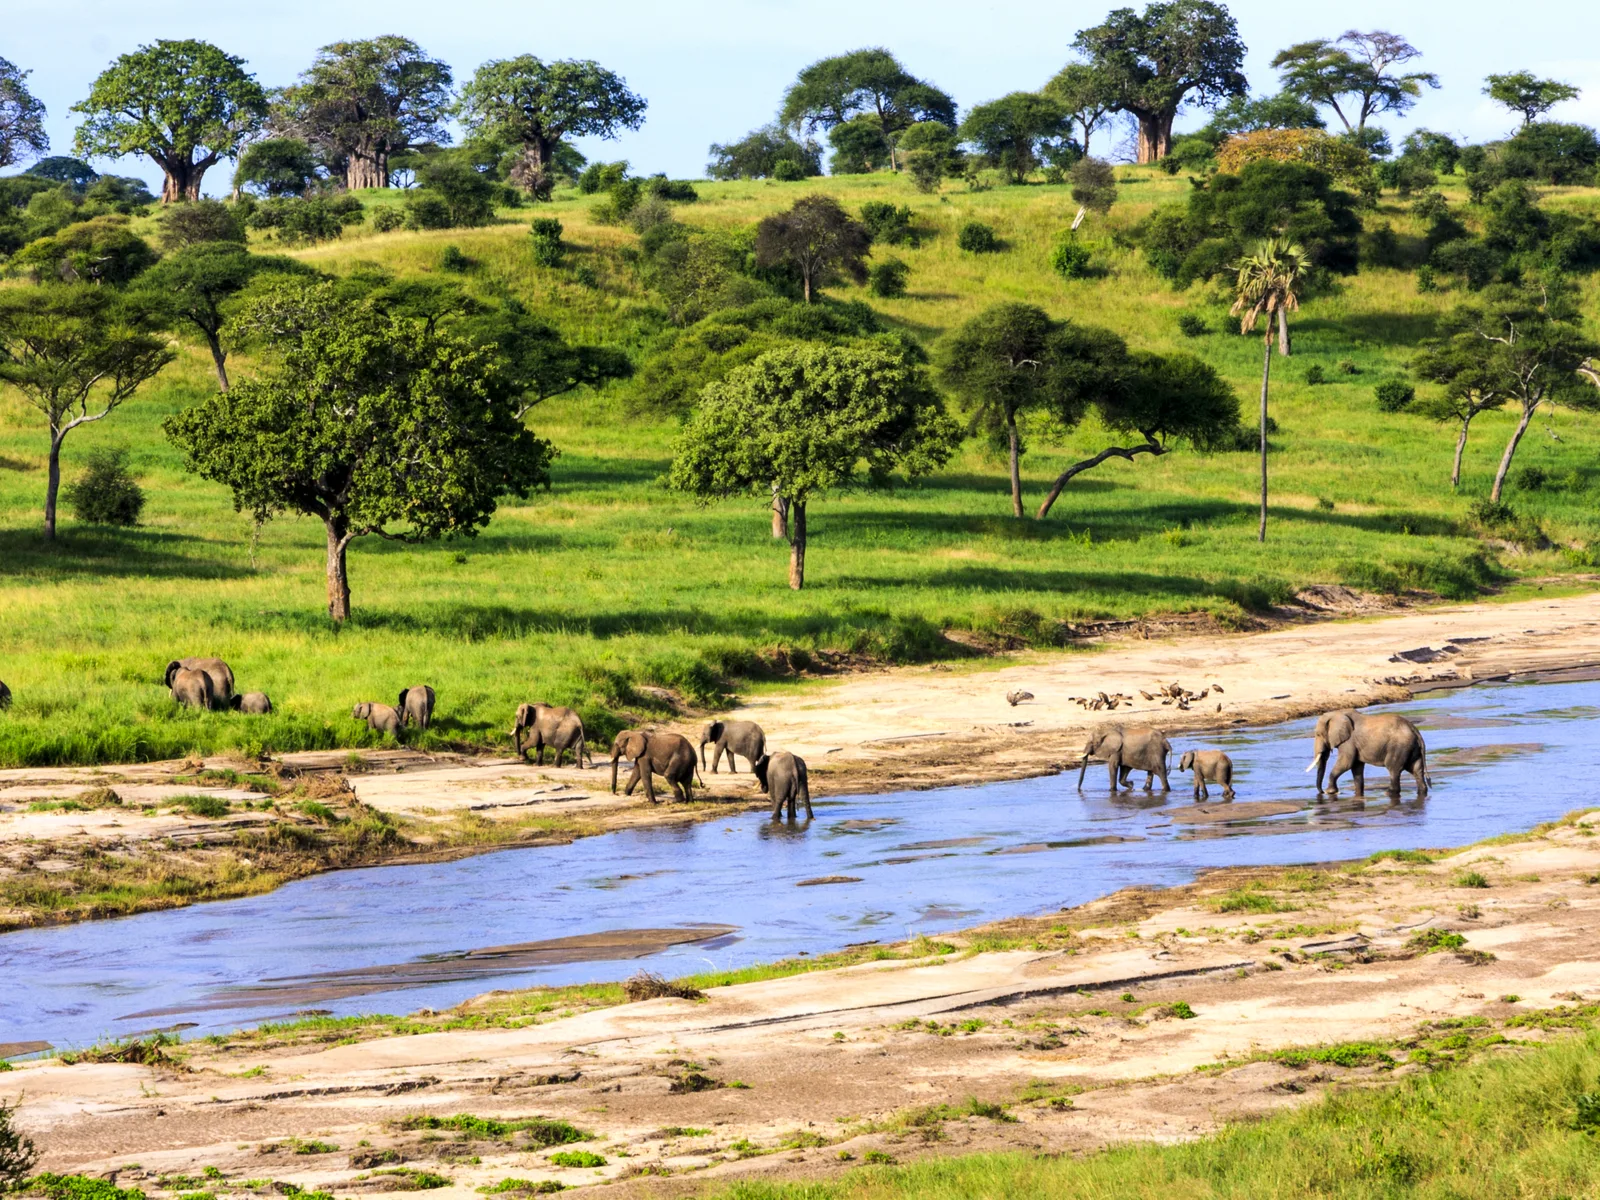 Elephants crossing the river in Serengeti National Park, one of the best safaris in Africa